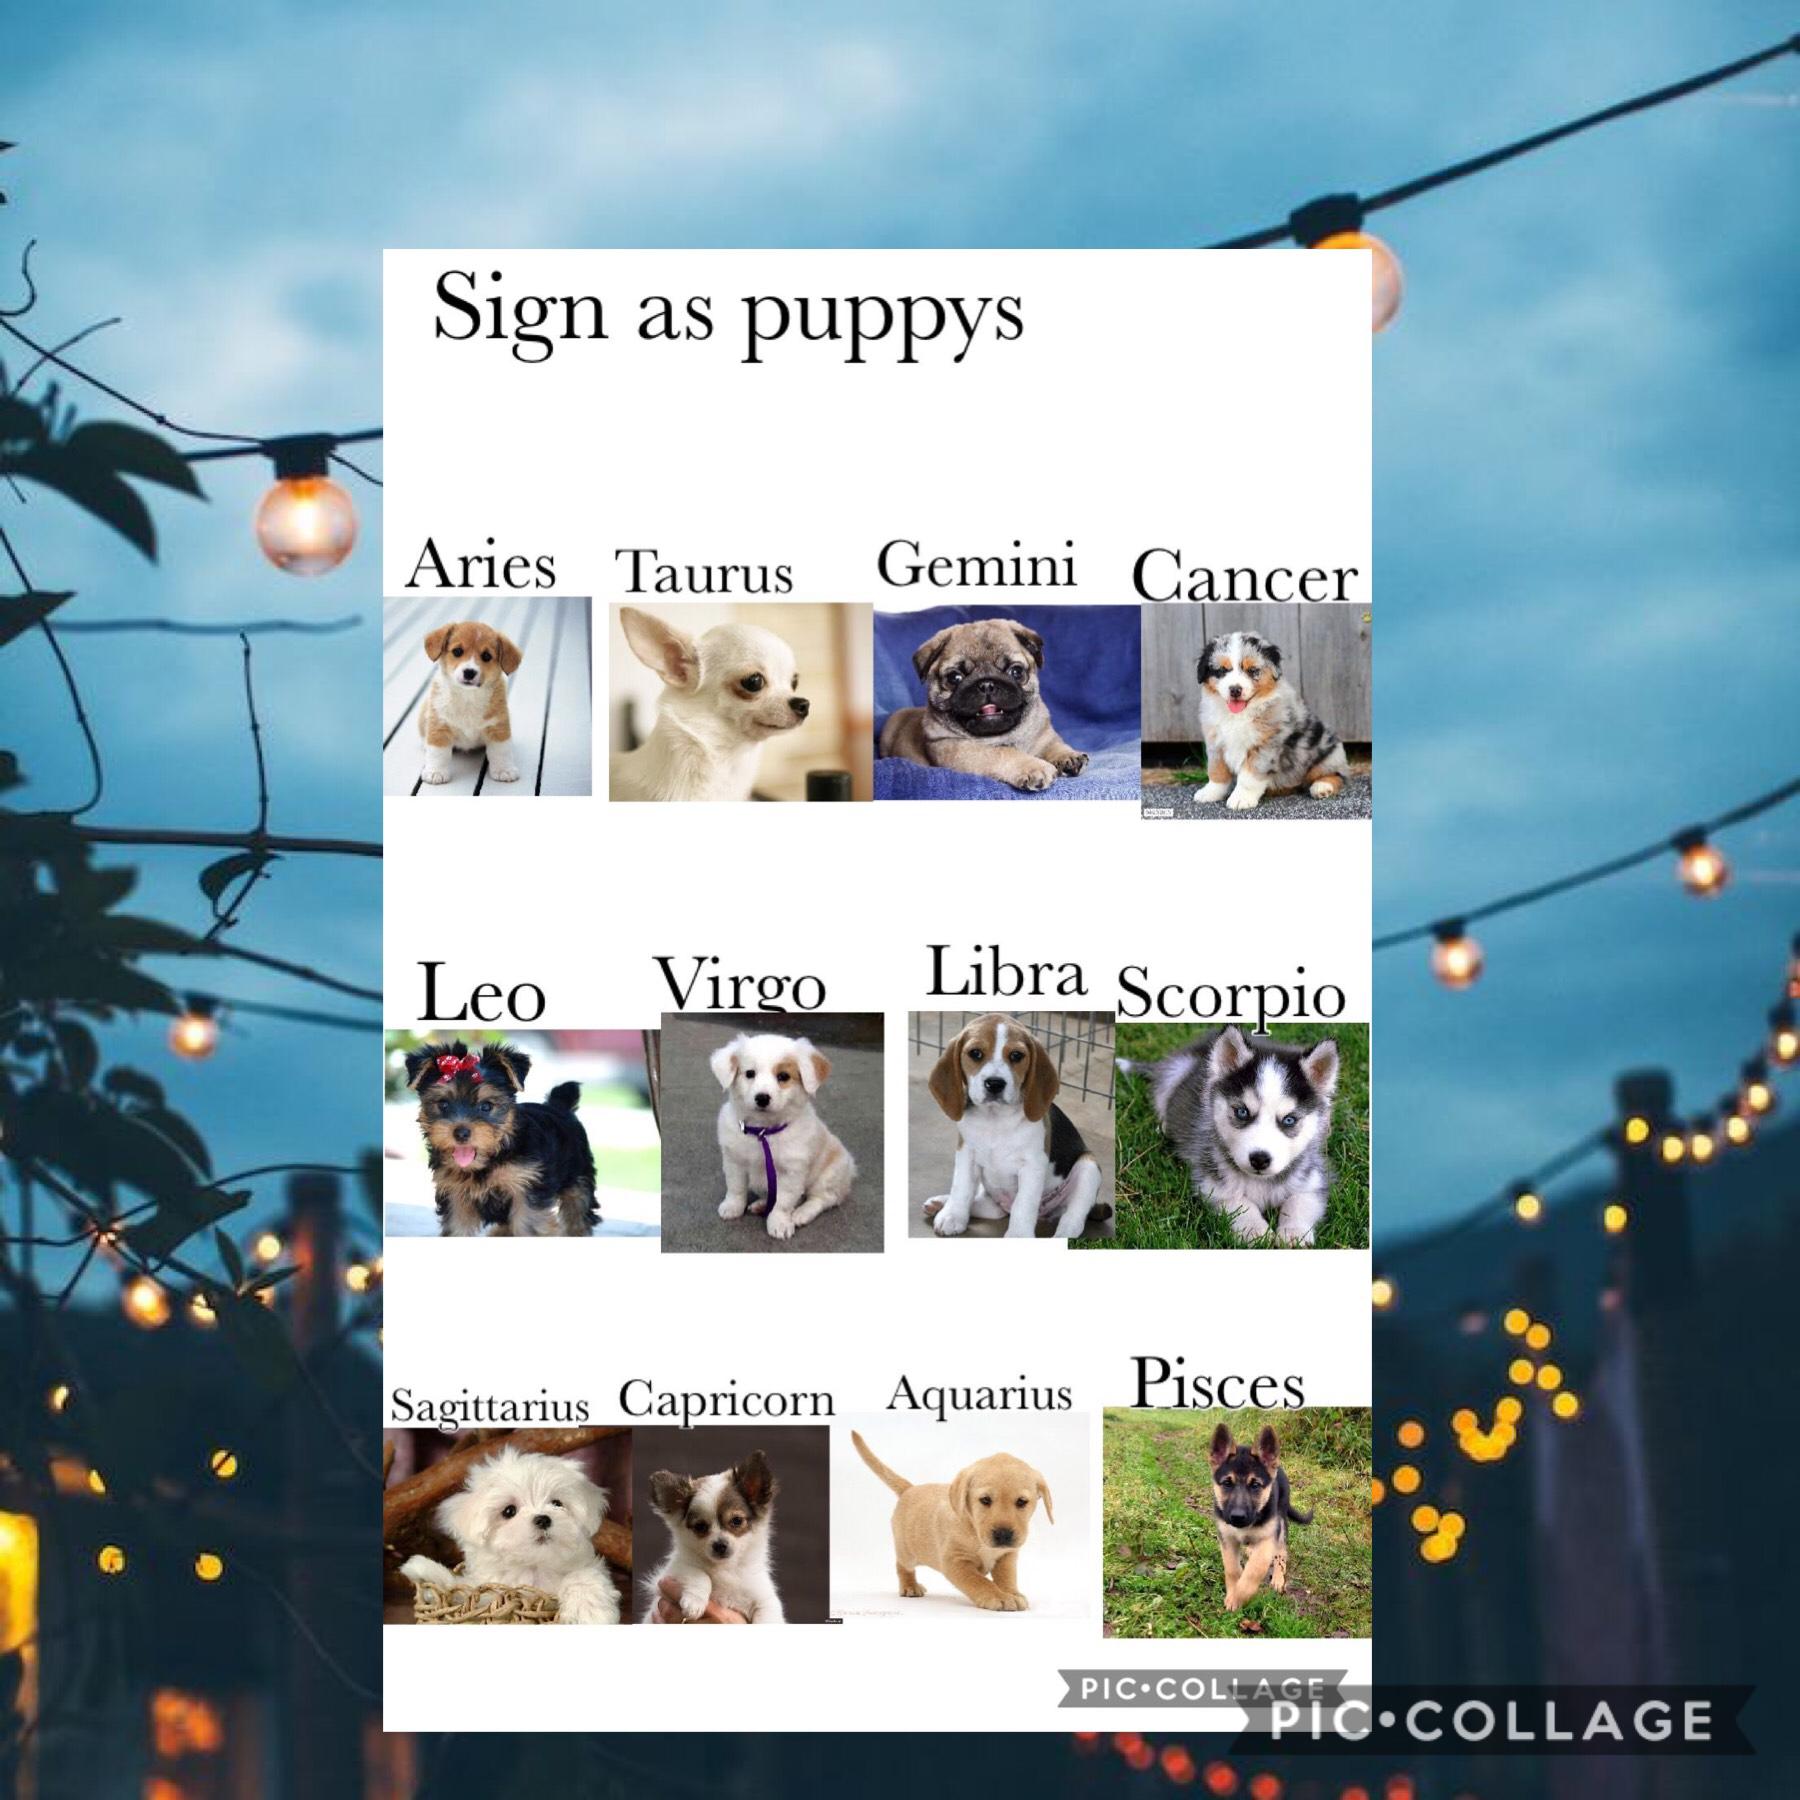 What’s your puppy?